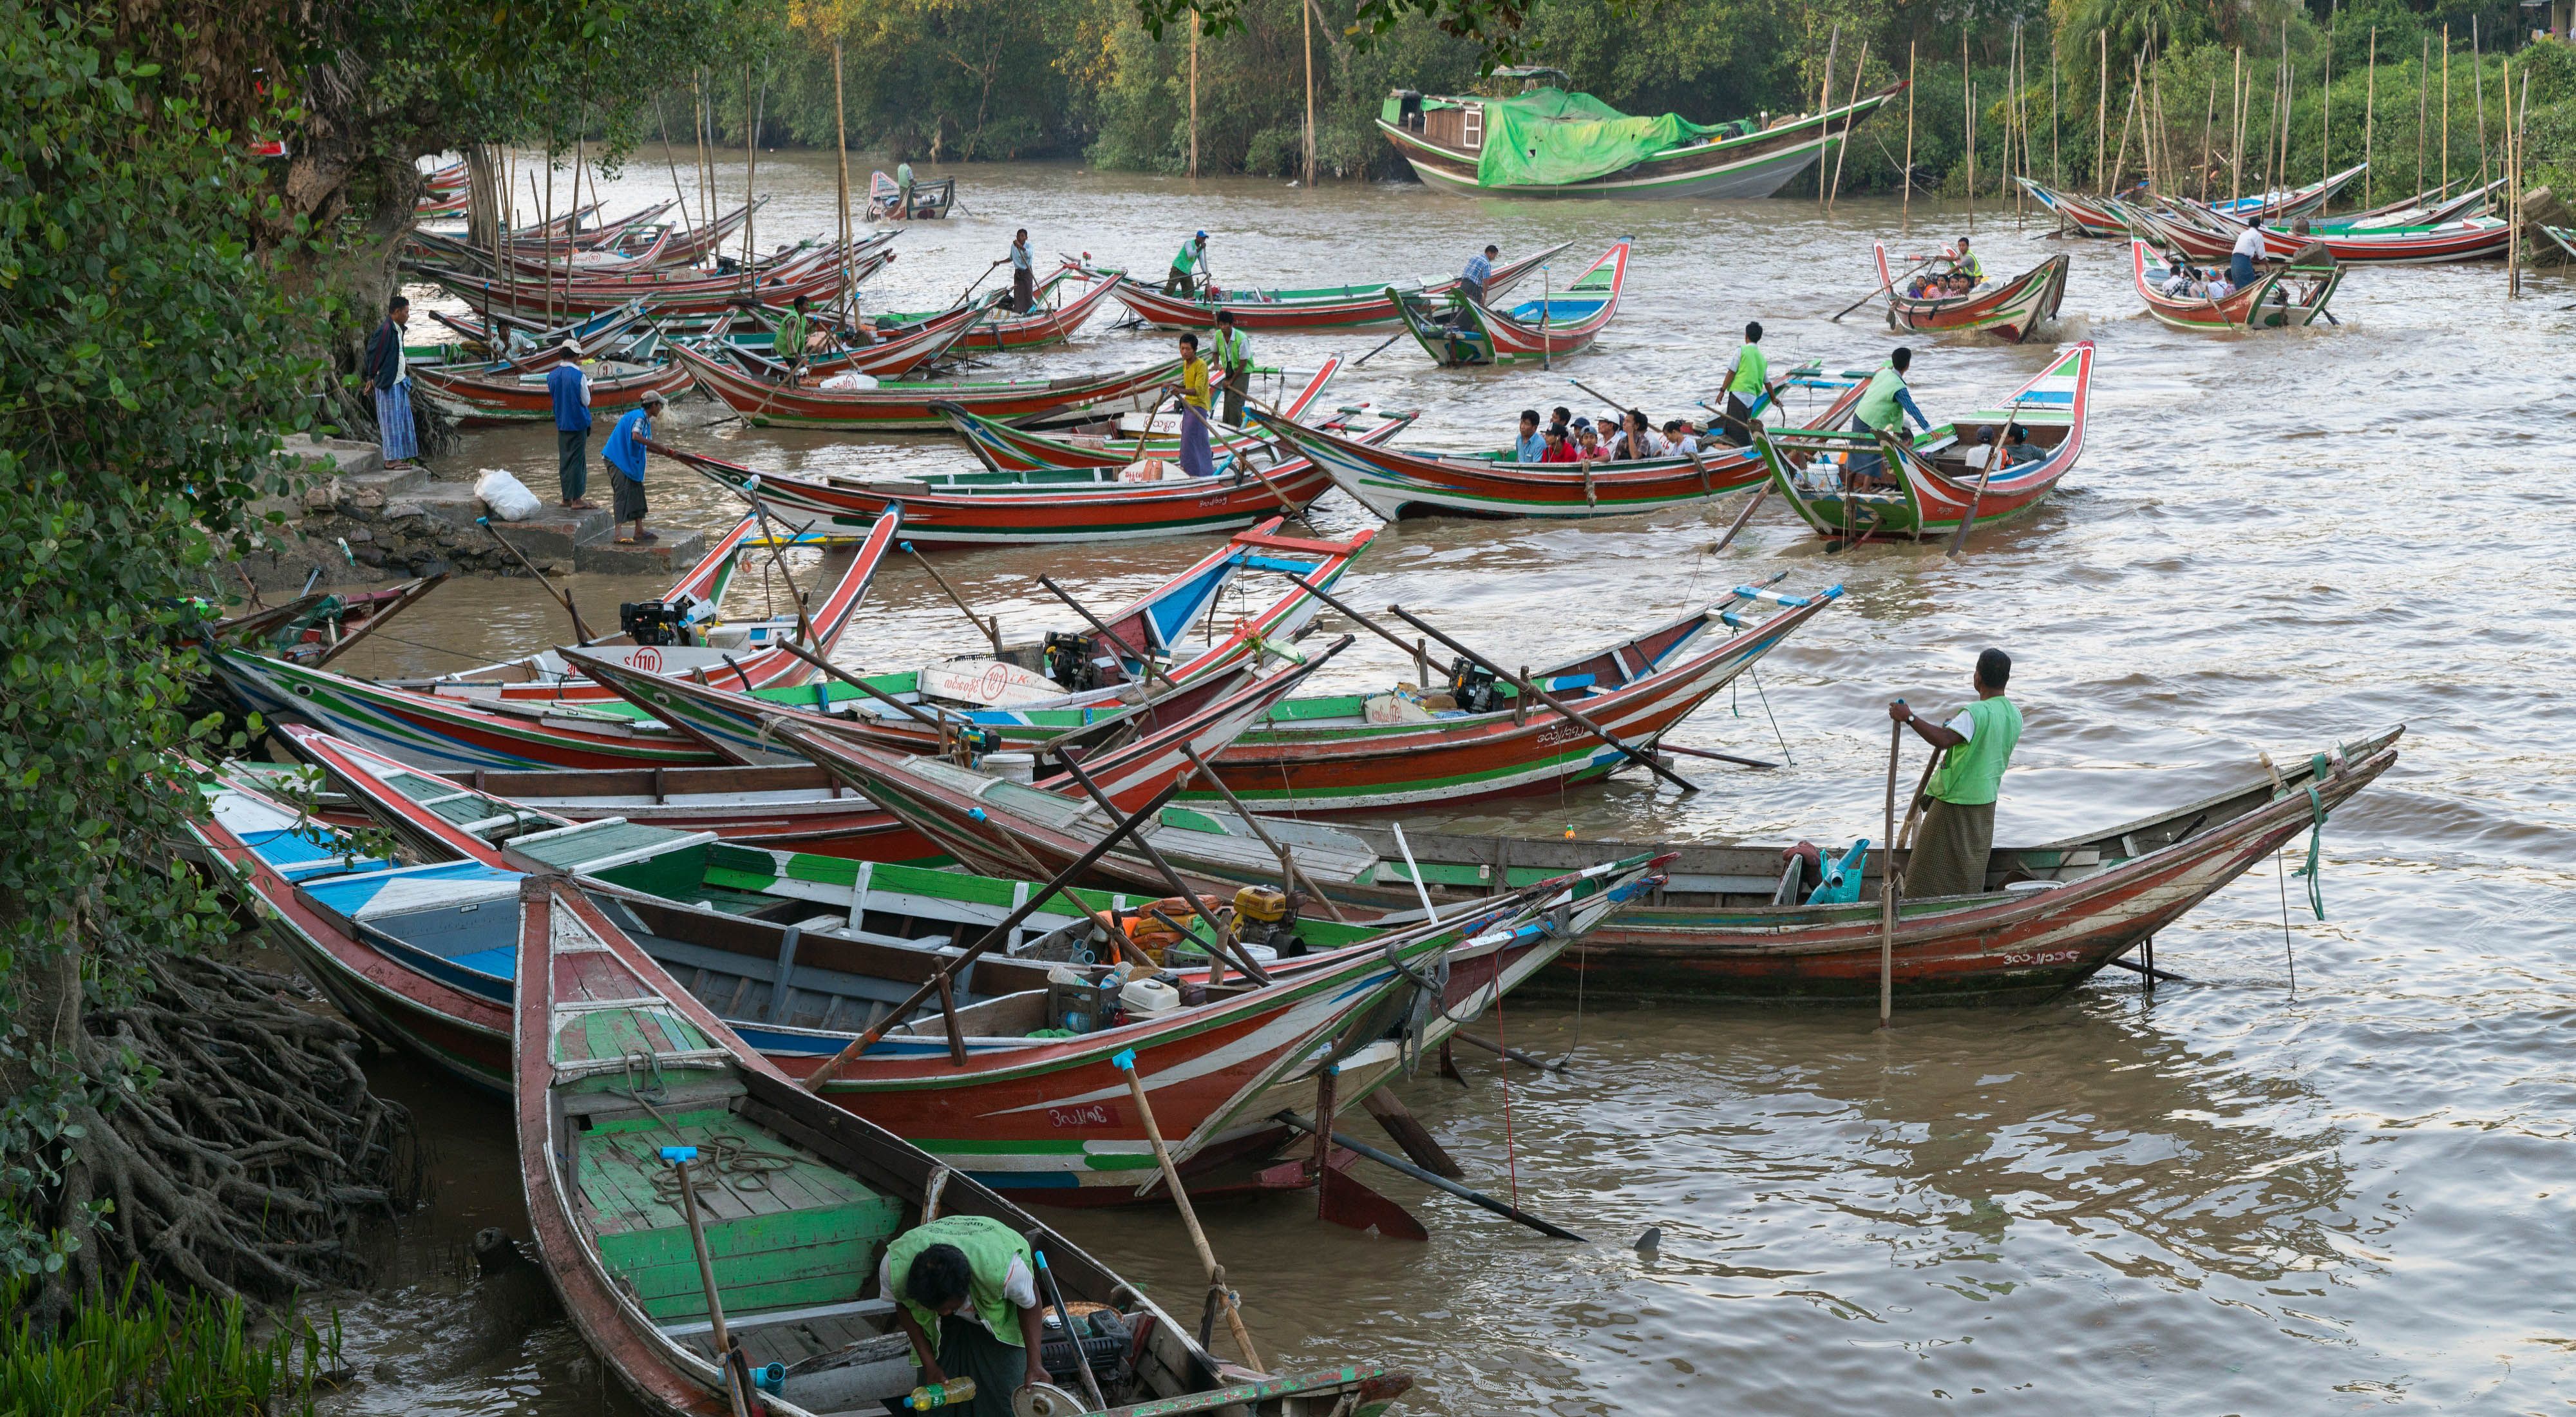 Dozens of brightly colored wooden fishing boats, some with fishermen in them, float in the Yangon River in Myanmar.